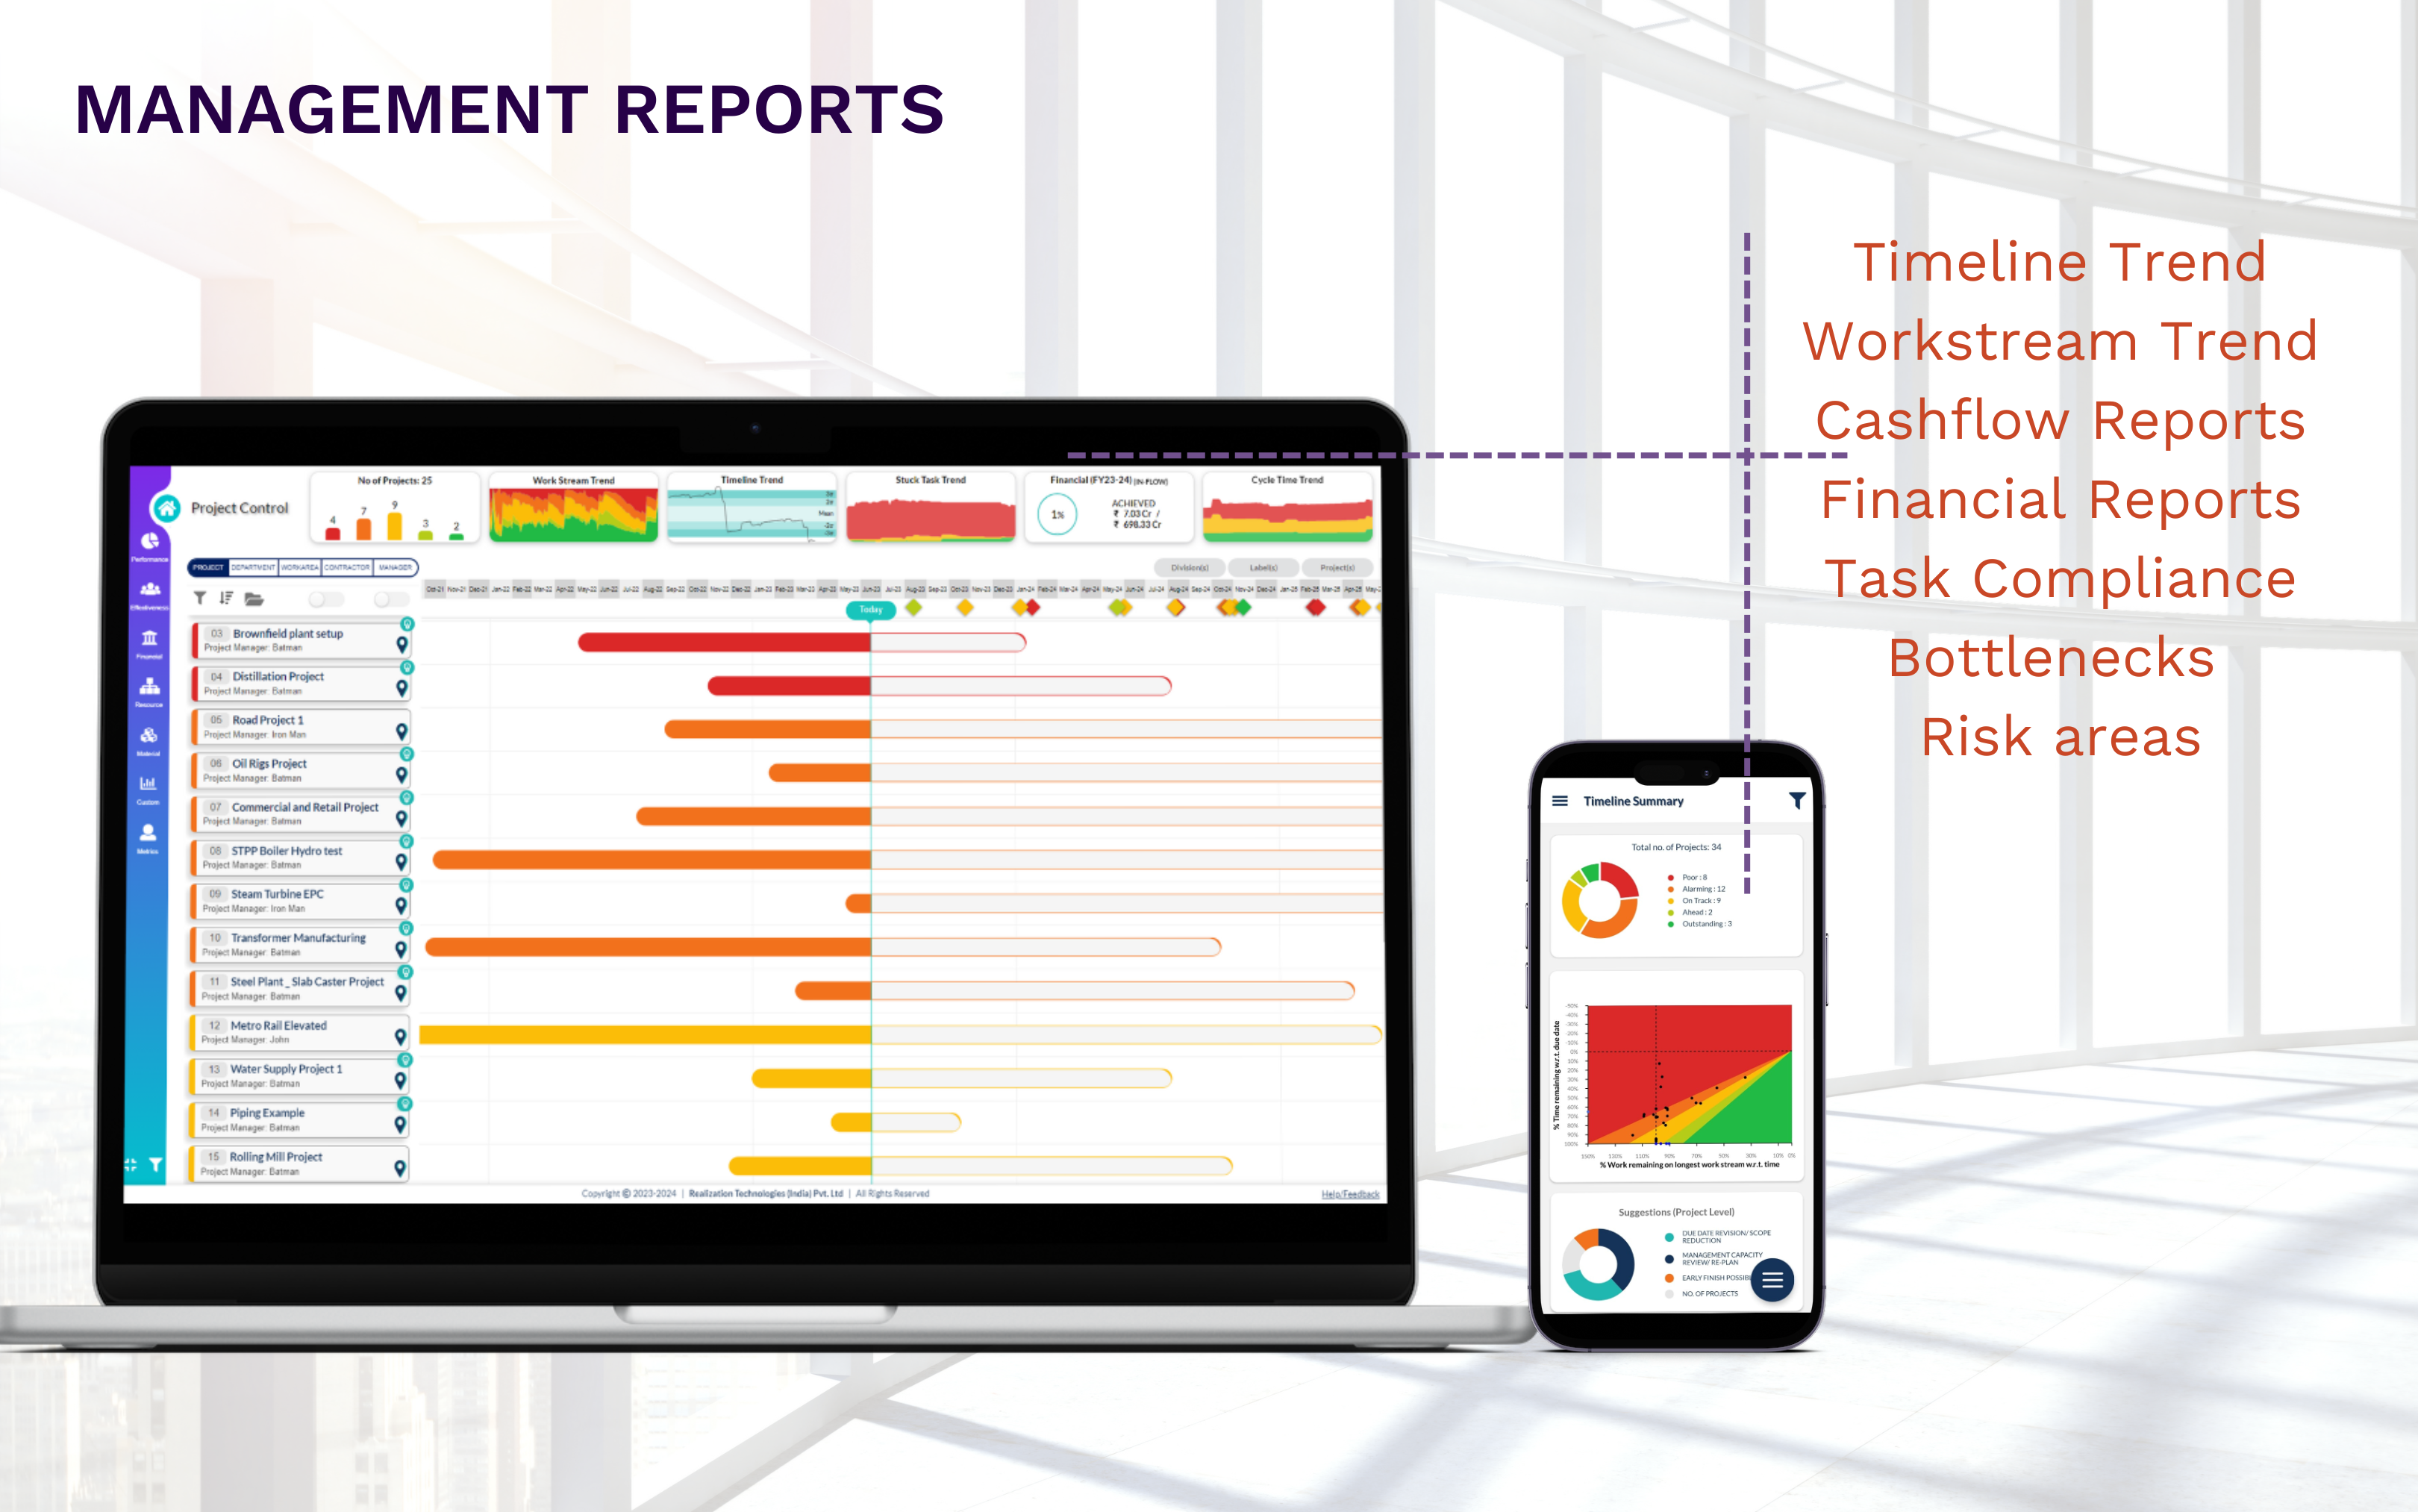 Generate any management reports - financials, volumetric, compliance, etc.